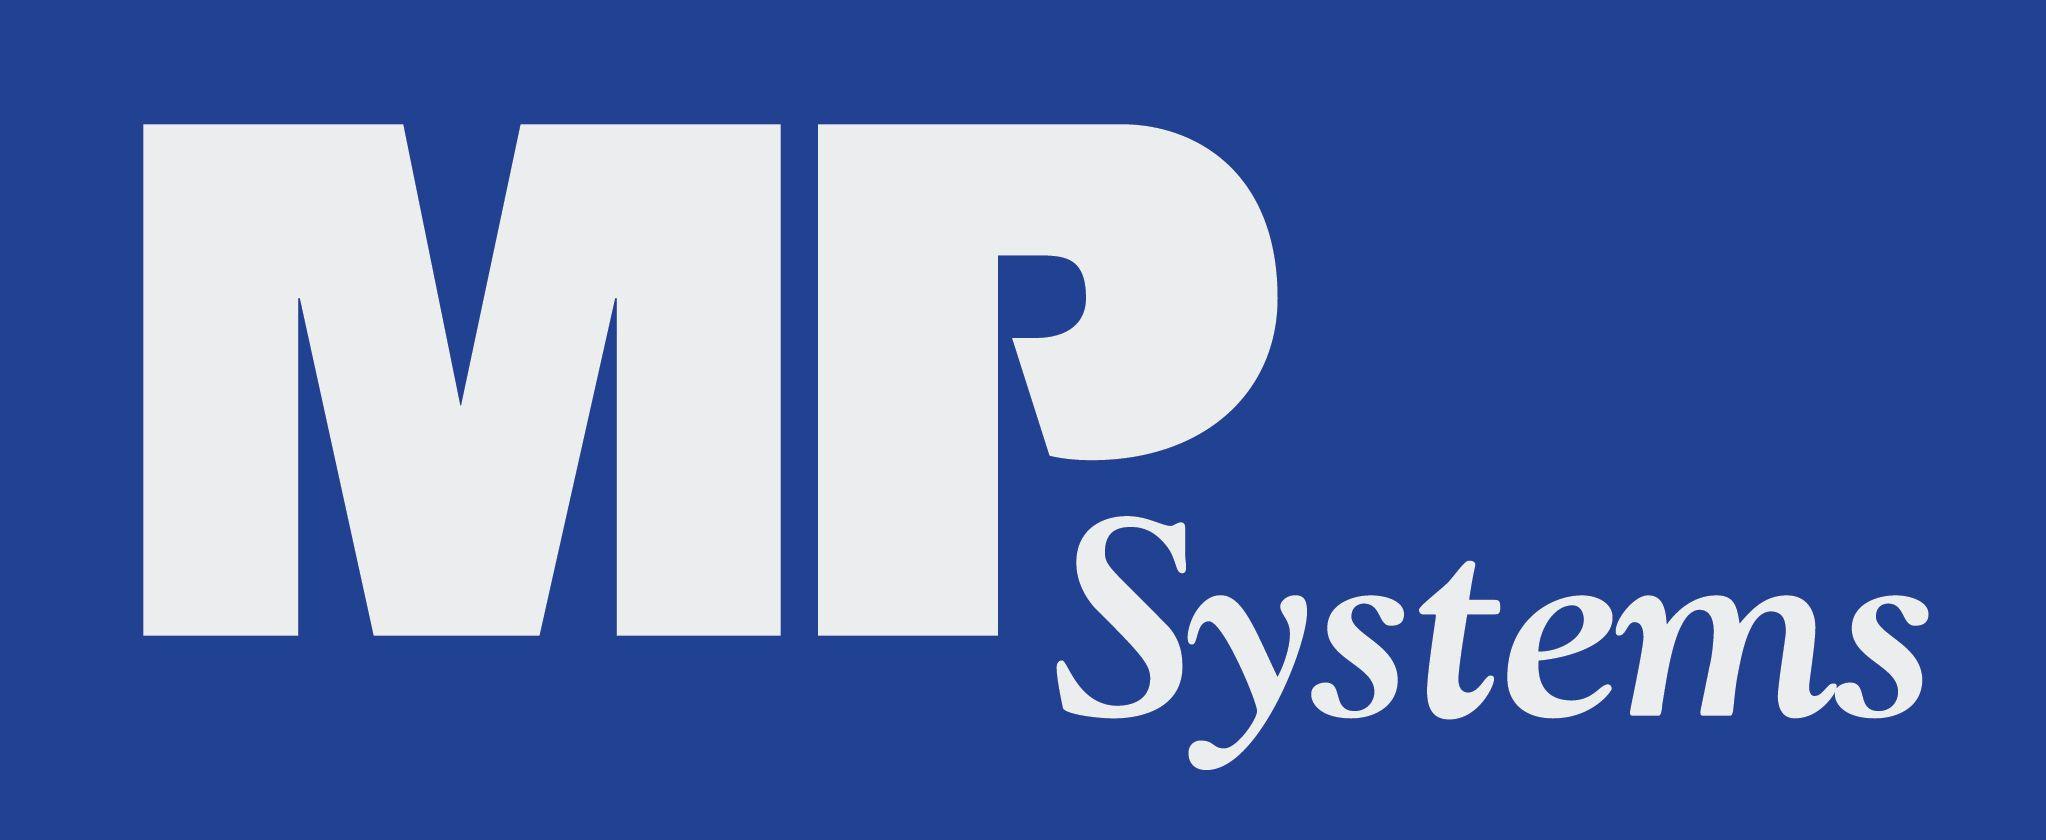 Blue and White MP Logo - MP Systems